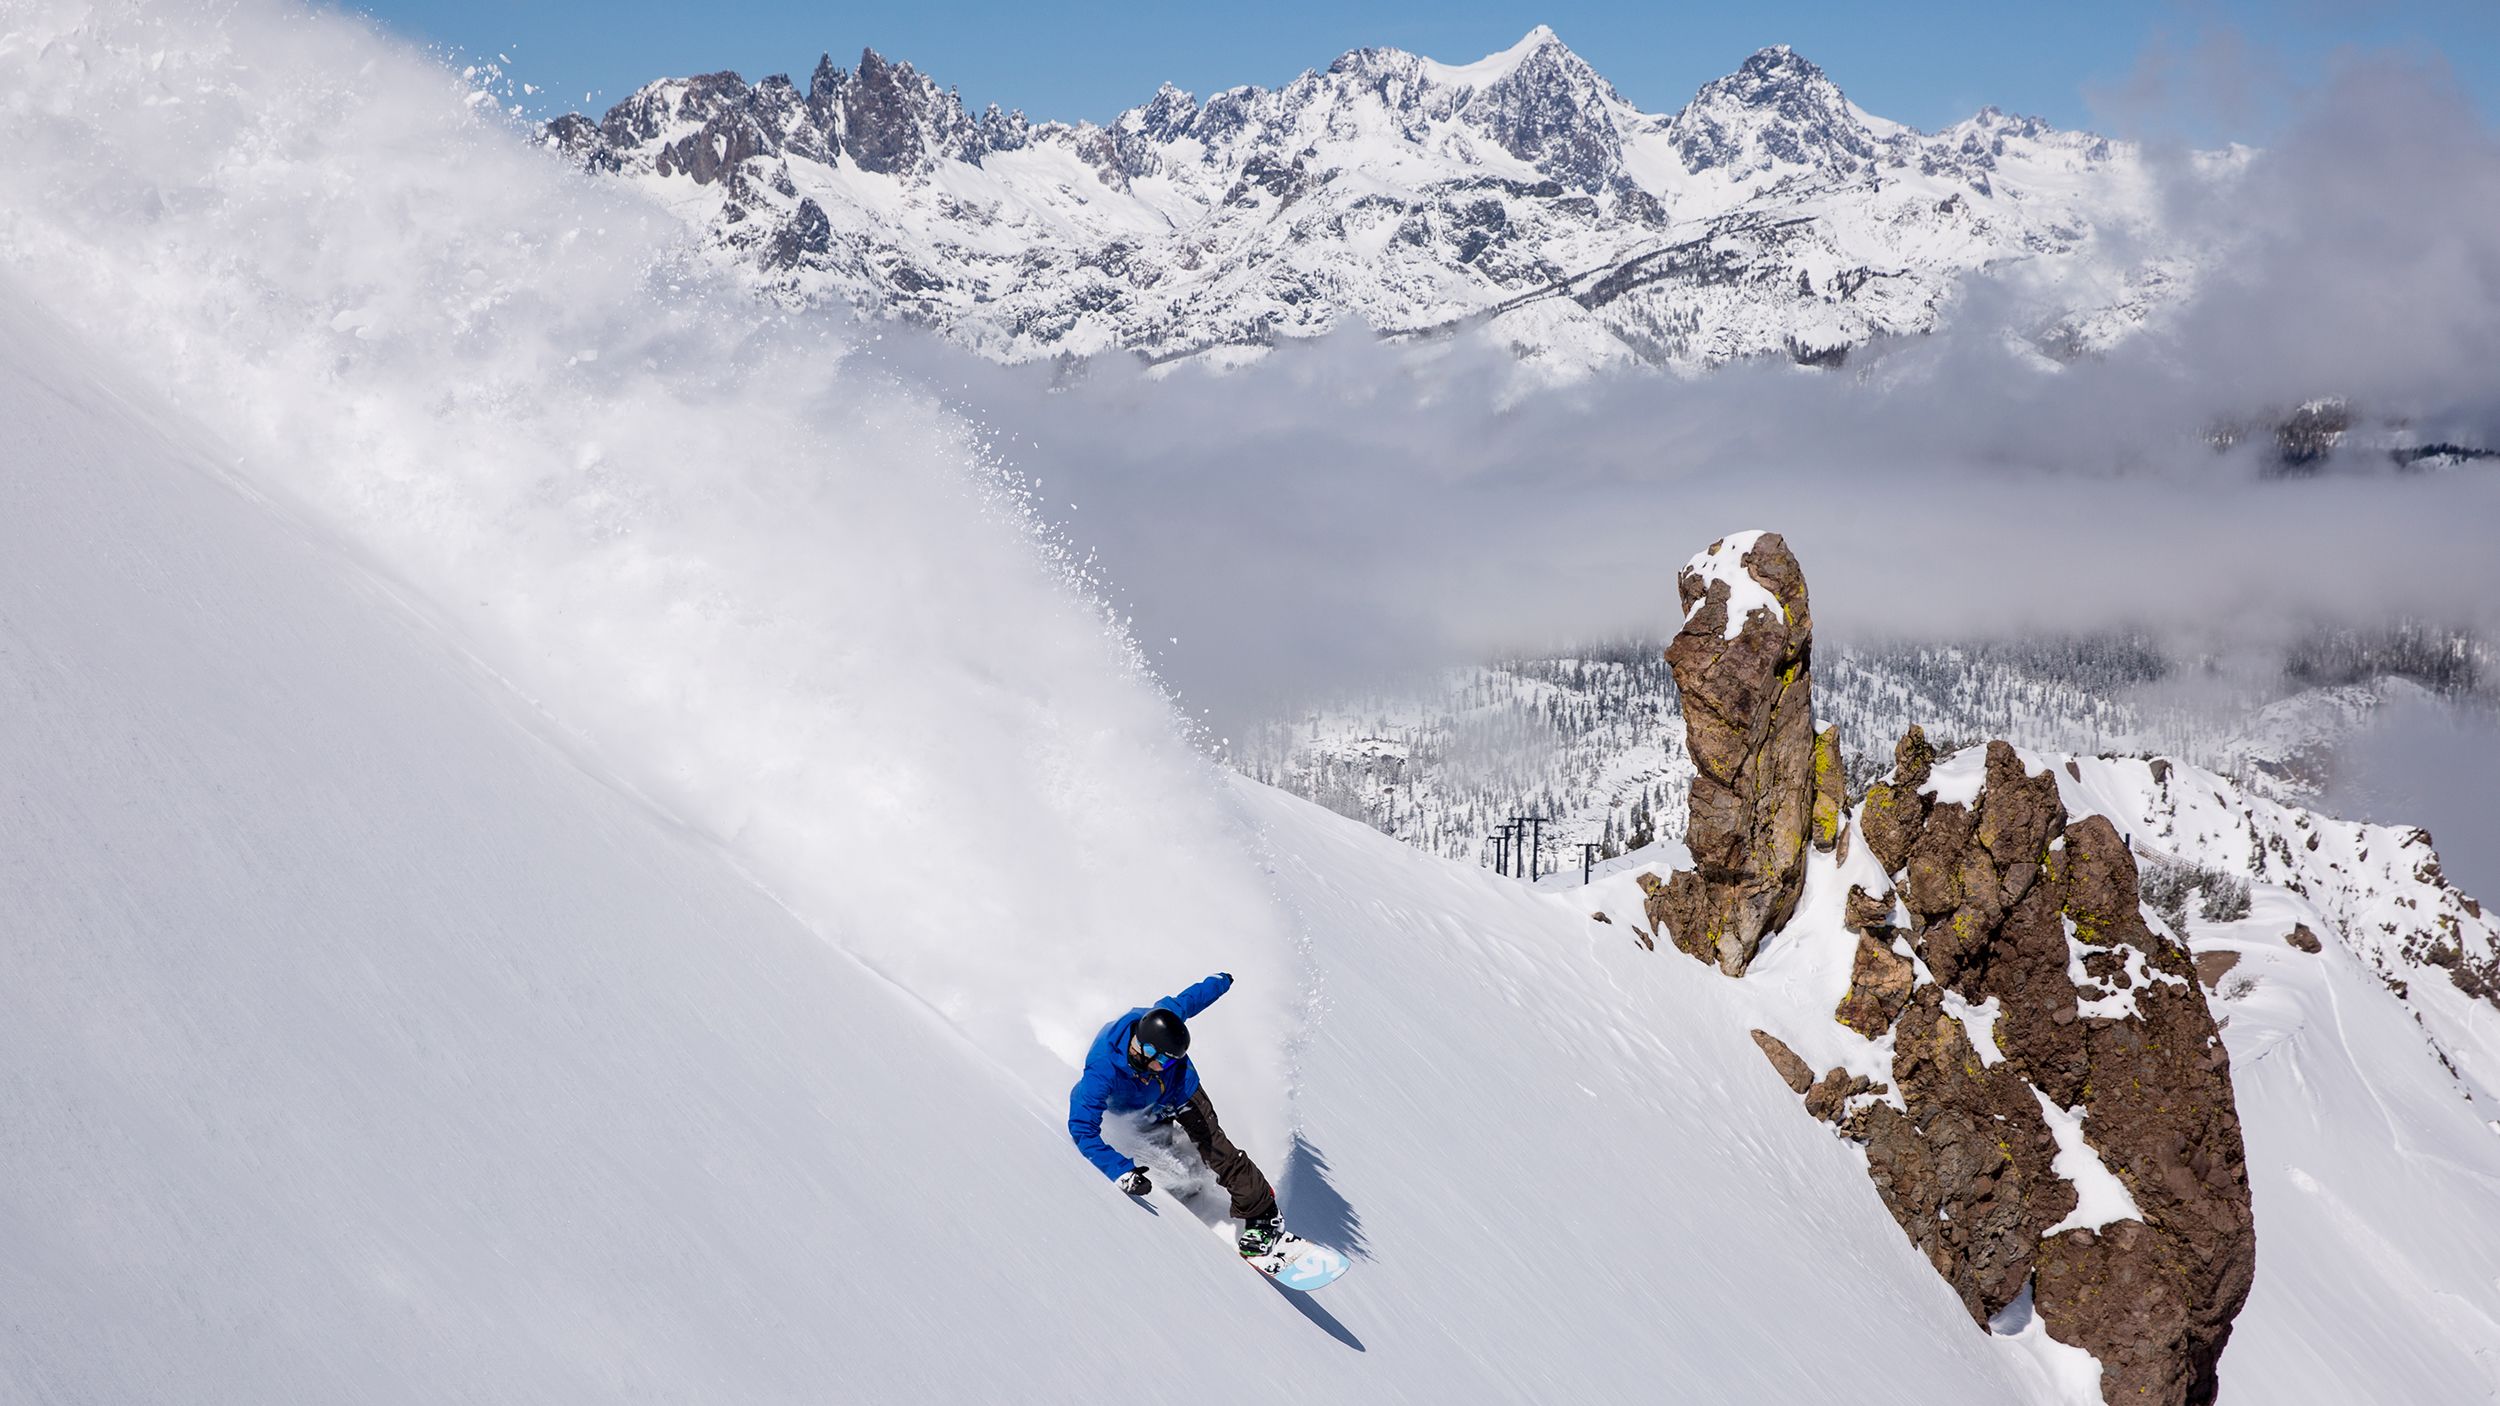 8 top spots for extreme skiing in the United States and Canada